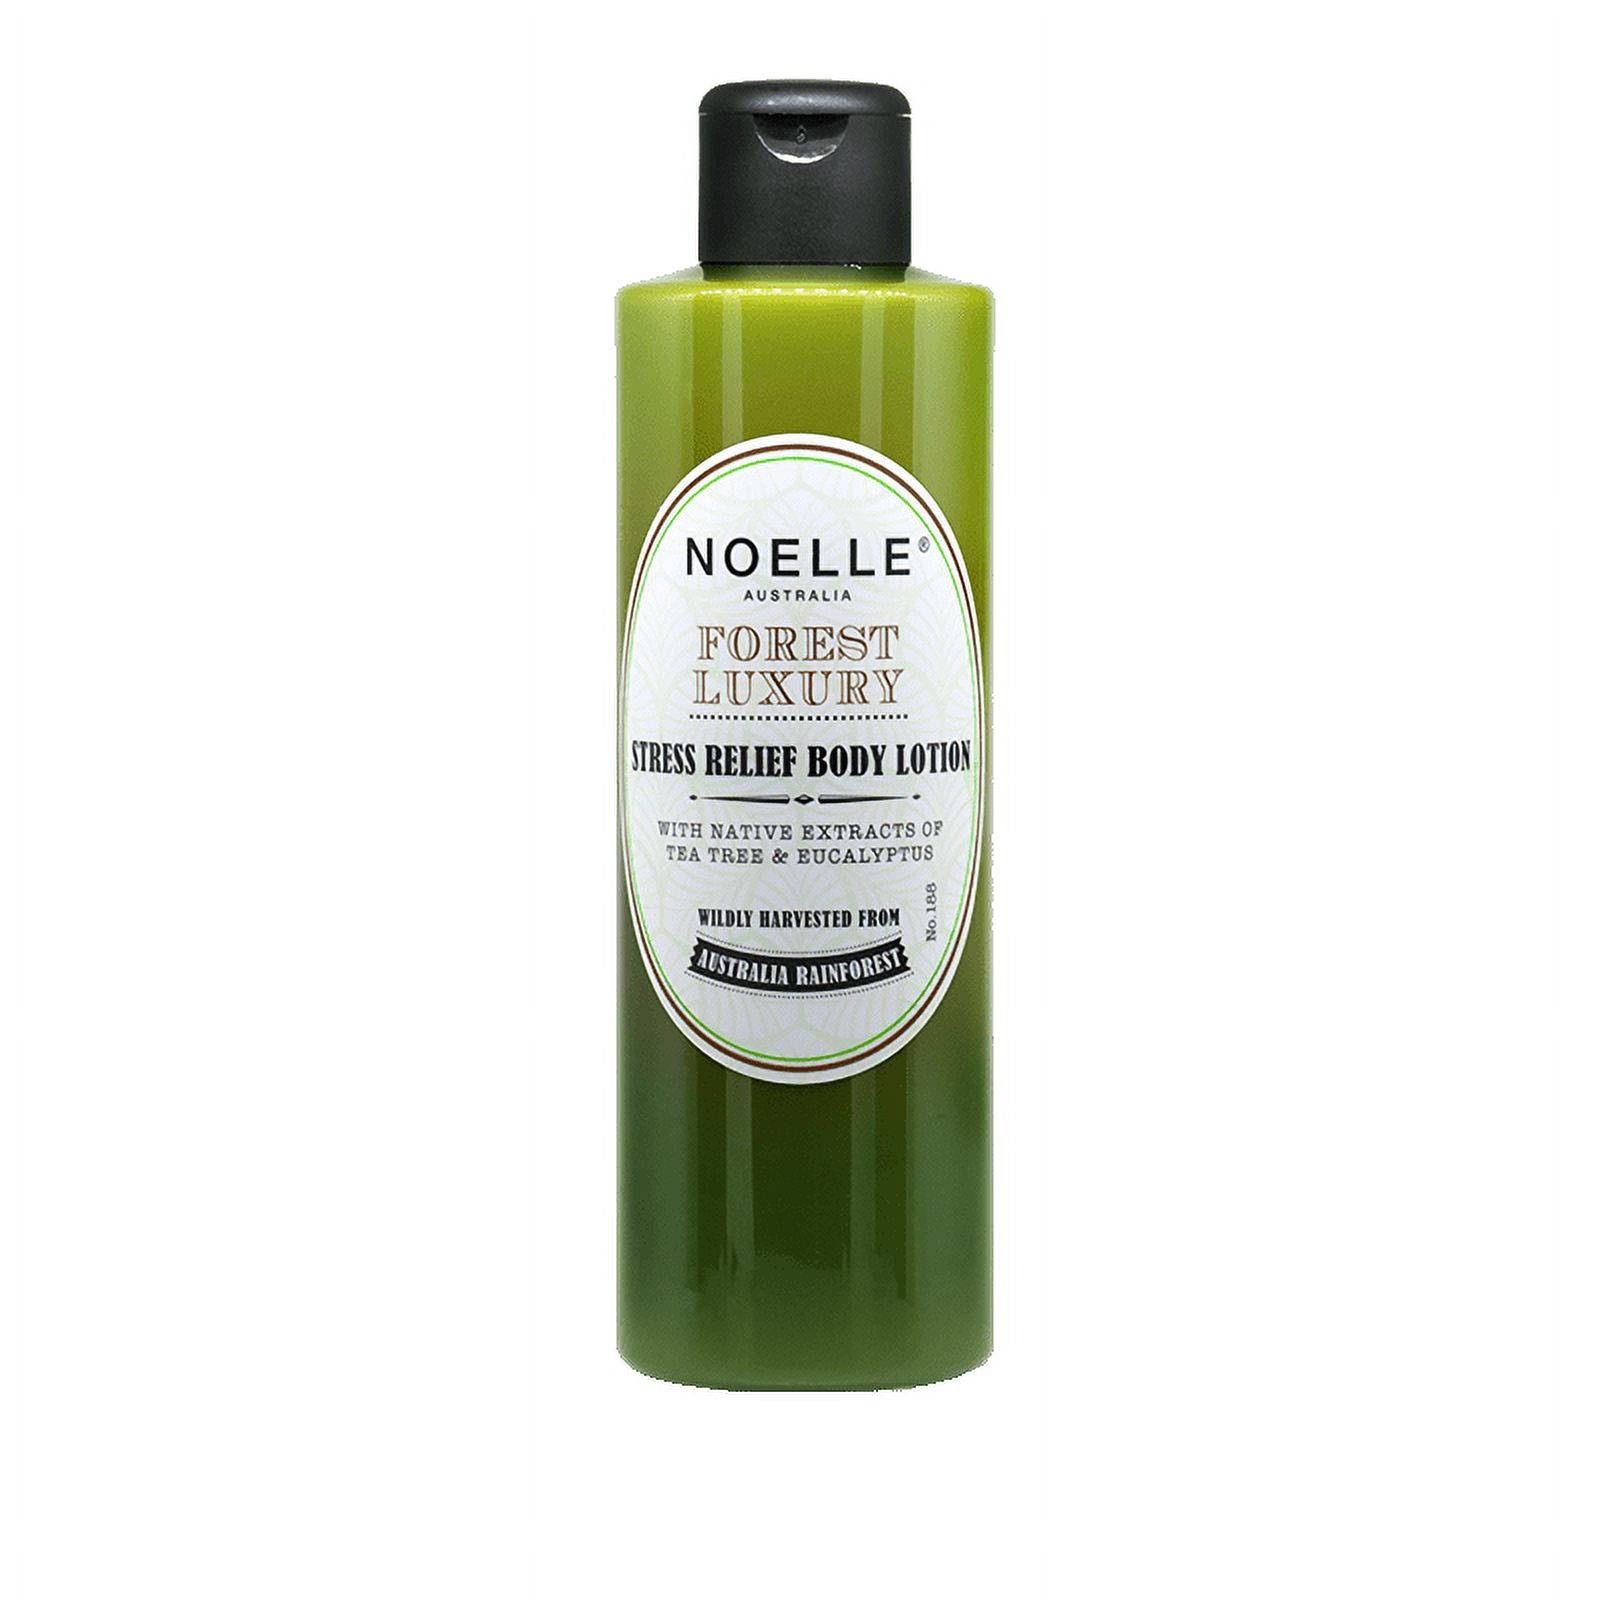 NOELLE AUSTRALIA - Forest Luxury Stress Relief Body Lotion - image 1 of 2